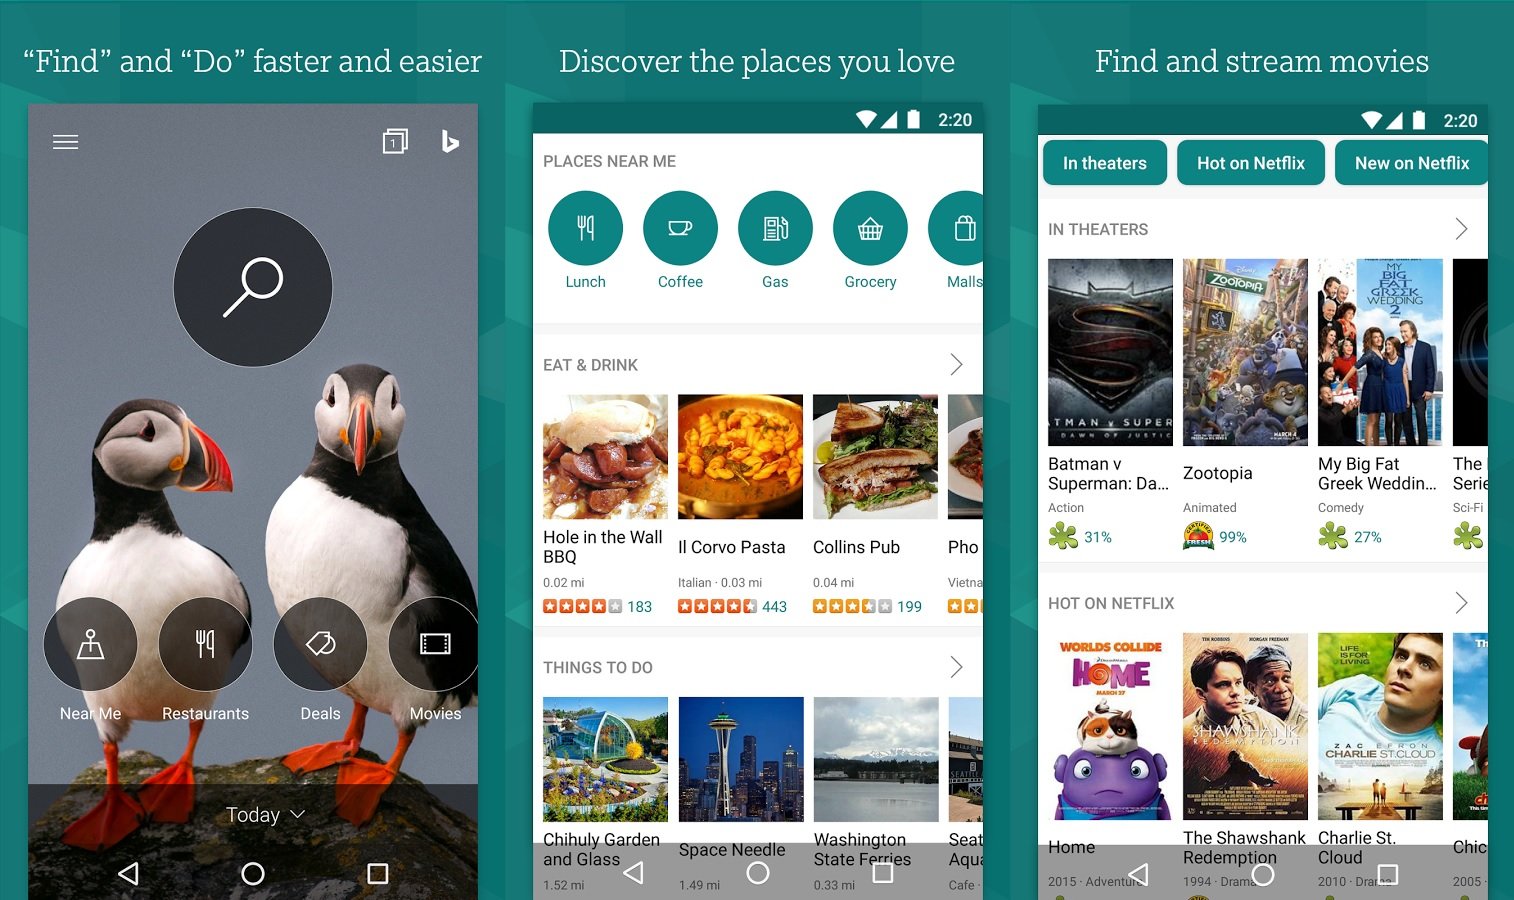 Bing for Android